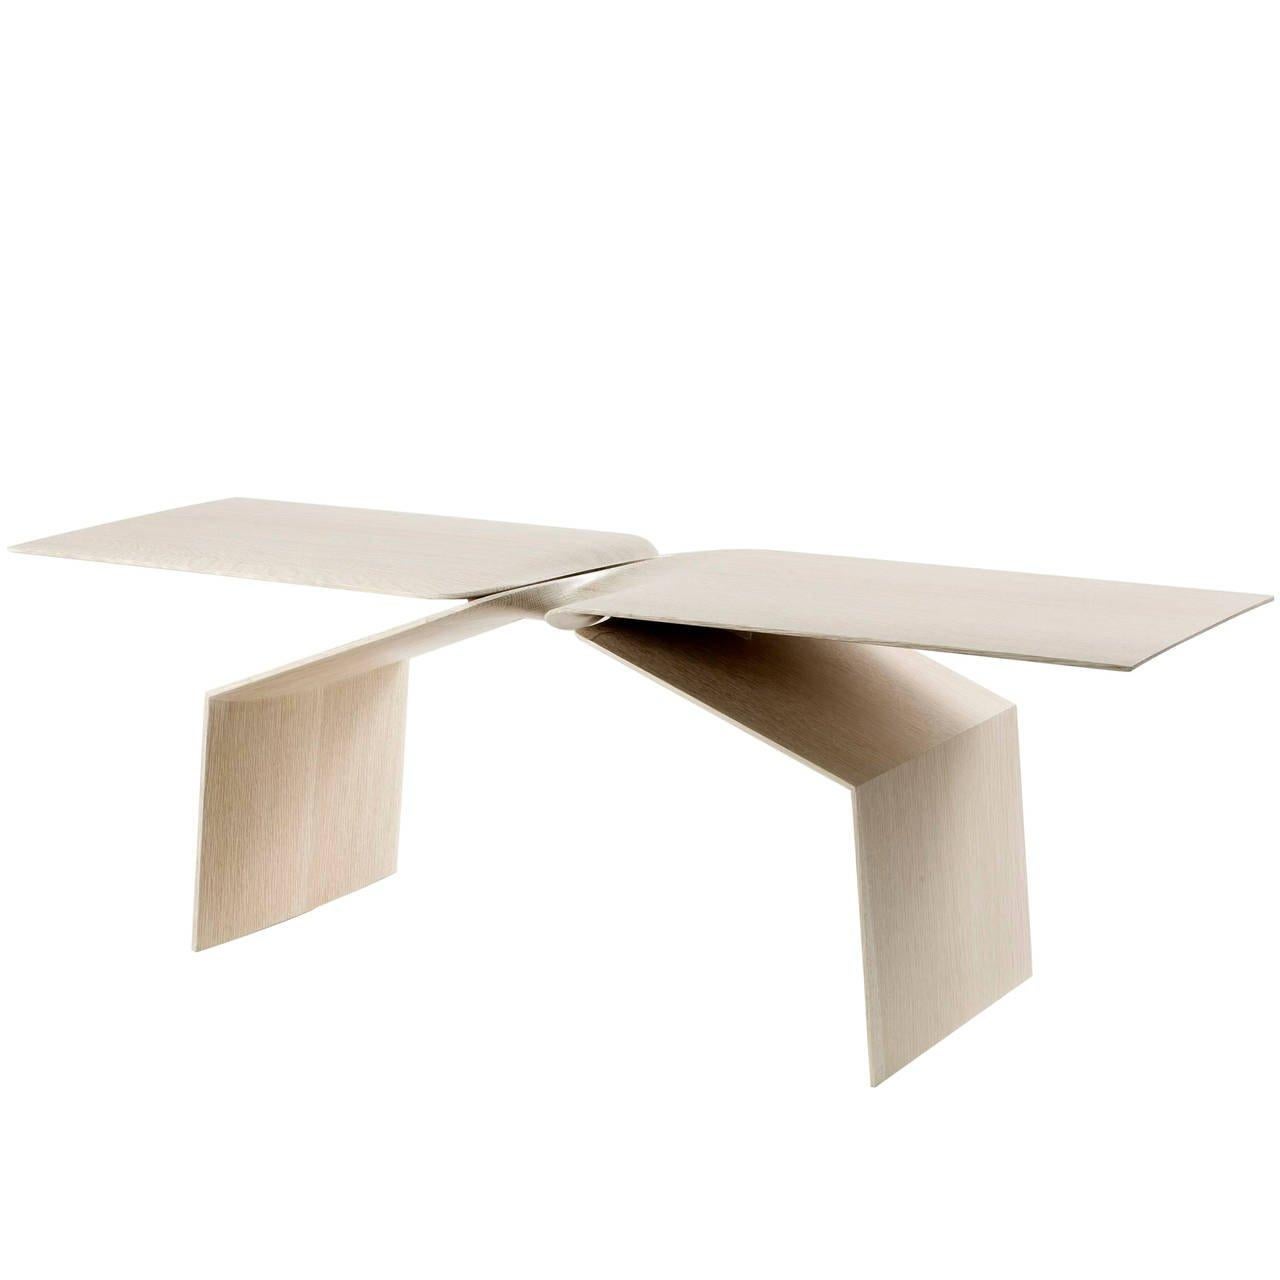 Carol Egan, Sculptural Hand-Carved Limed Oak Coffee Table, USA, 2015 In Excellent Condition For Sale In New York, NY